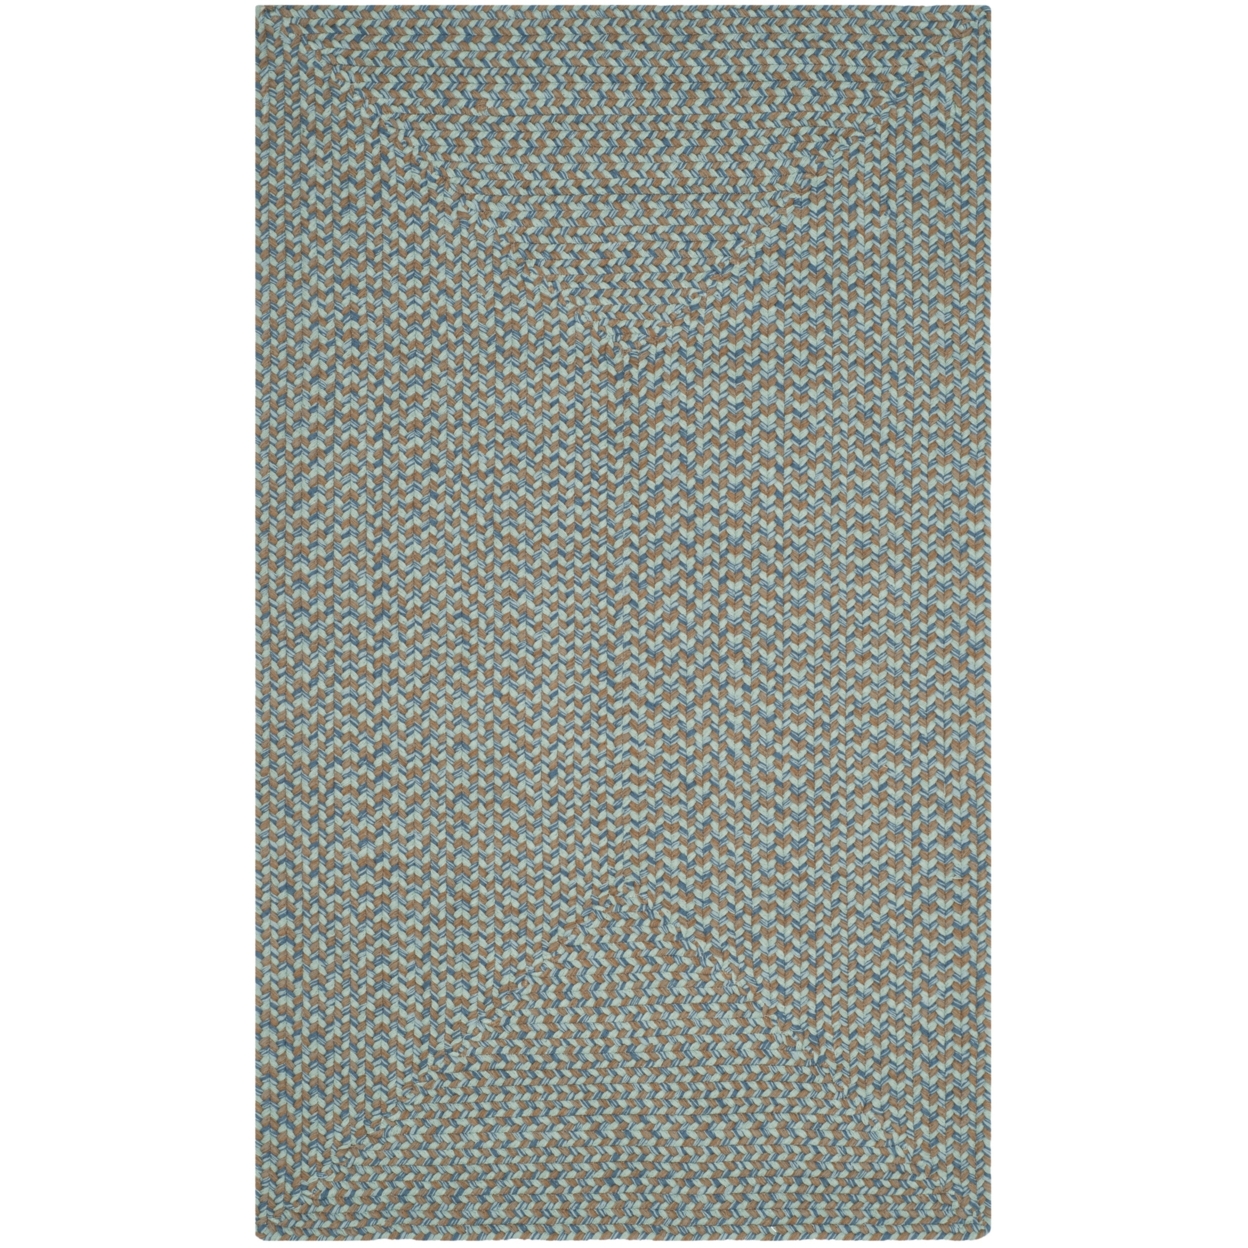 SAFAVIEH Braided Collection BRD170A Handwoven Multi Rug - 3' X 5'